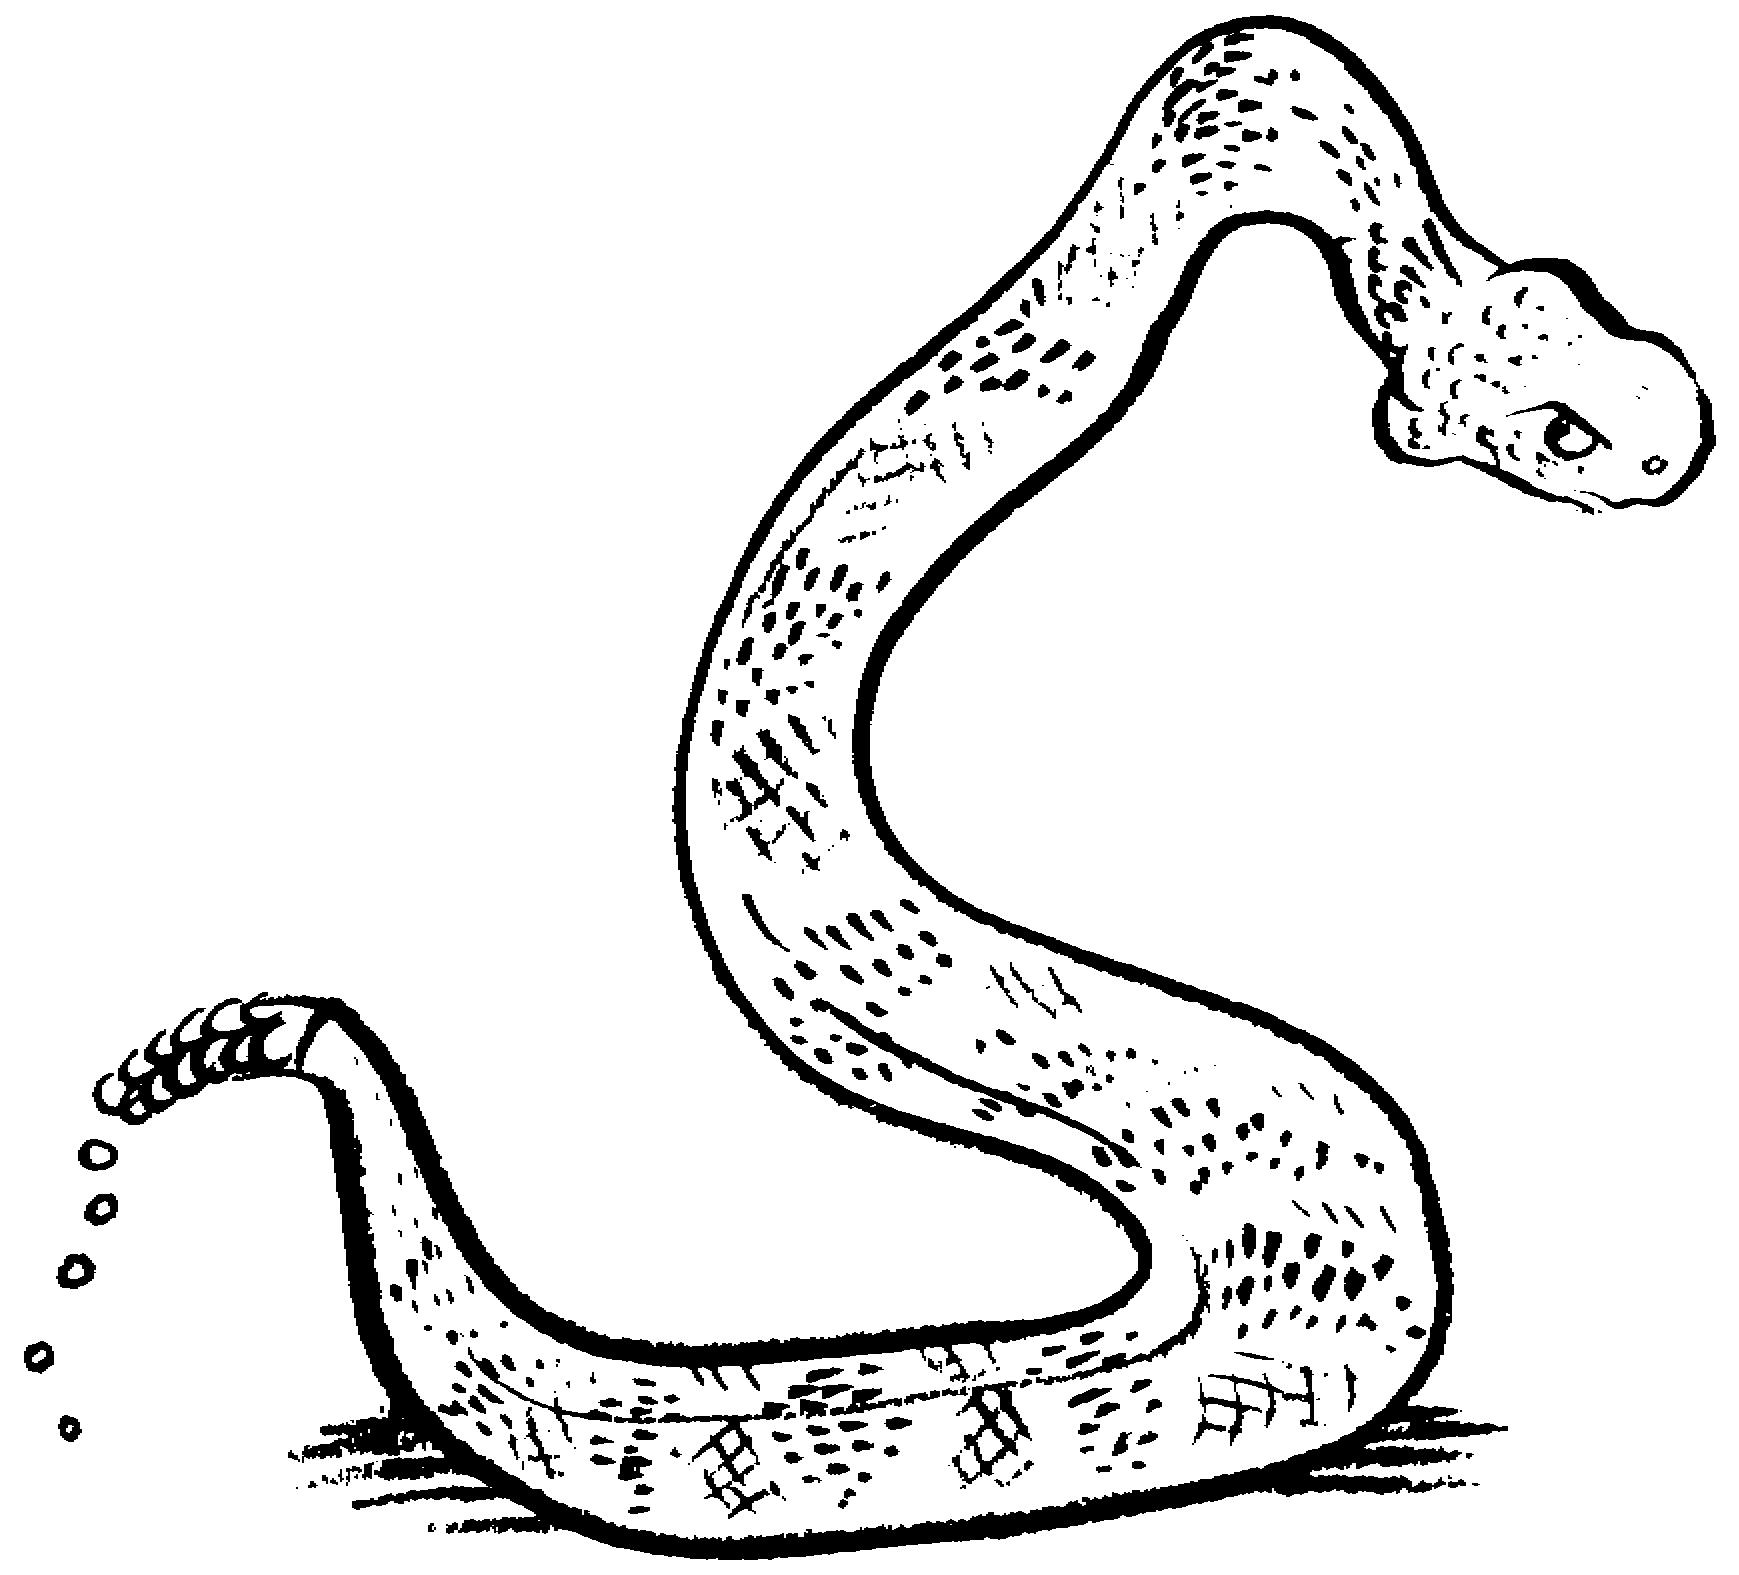 Snake Clipart 24639 Hd Wallpapers in Animals - Imagesci.com